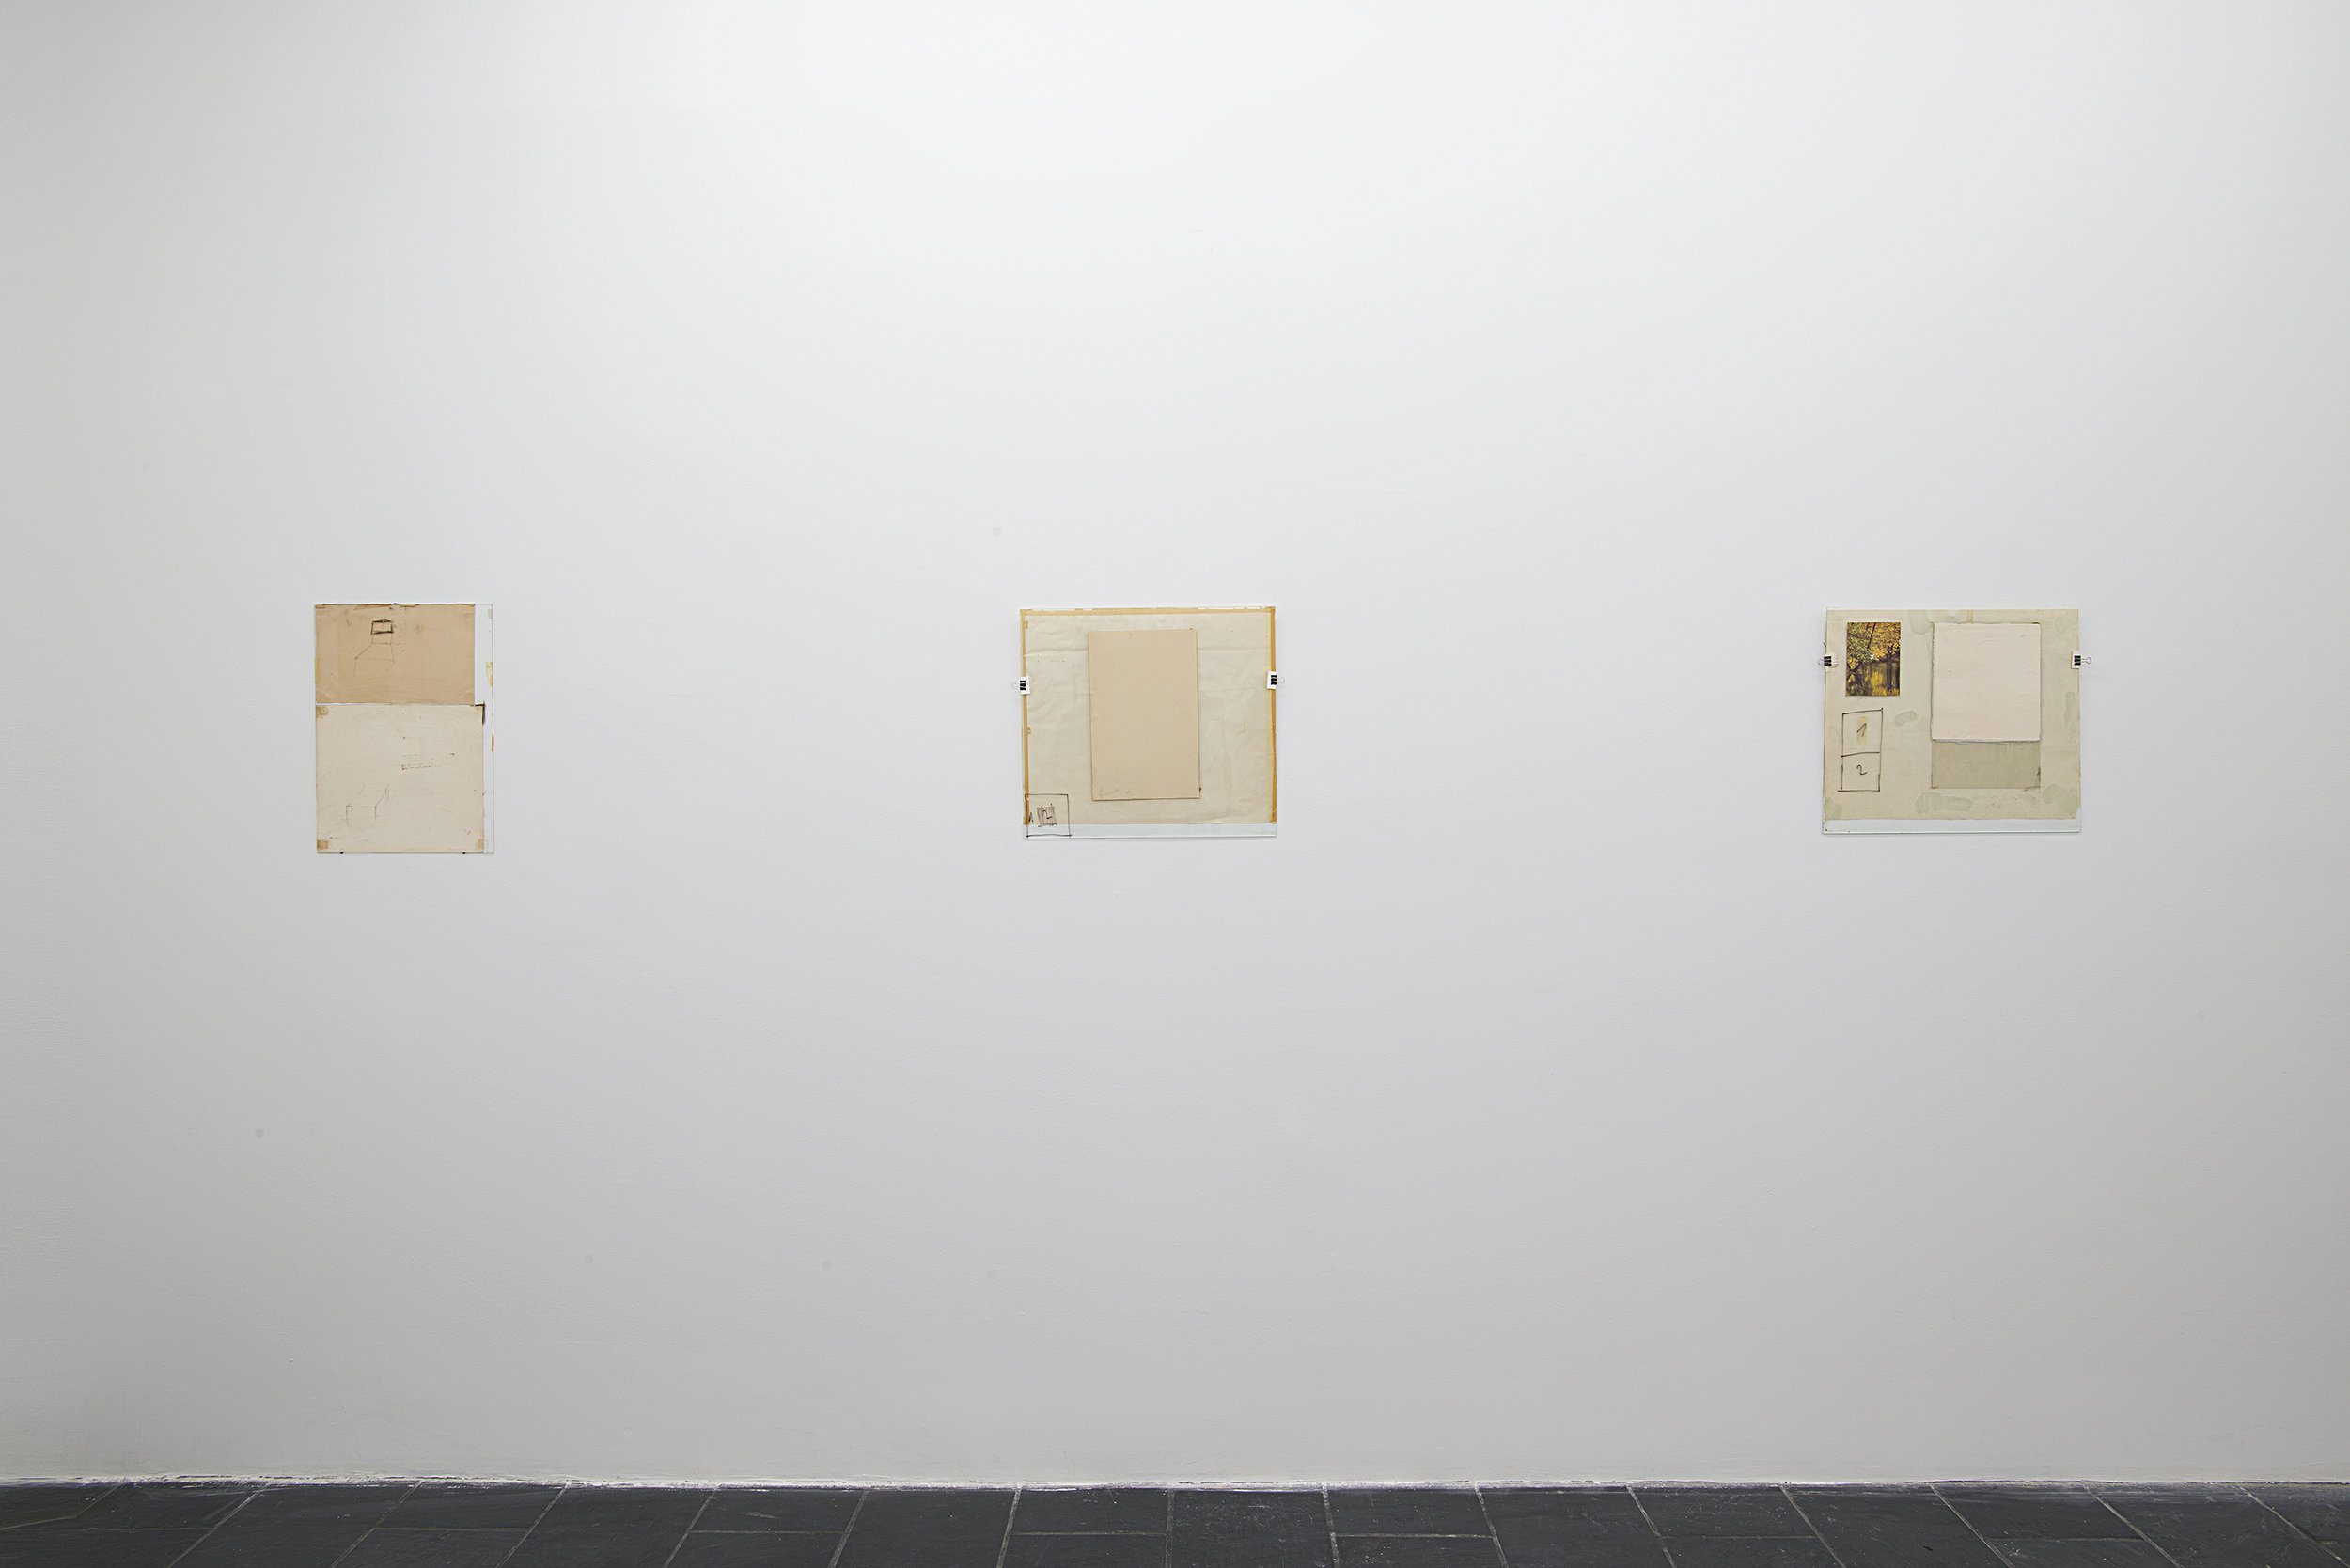  Installation view:&nbsp; Nahum Tevet: Works on Glass, 1972–1975 , Hunter College Art Galleries, 2016. Photo by Bill Orcutt.&nbsp;Left to right: Untitled #36, 1975; Untitled #24, 1975; Untitled #26, 1975.&nbsp;&nbsp;  